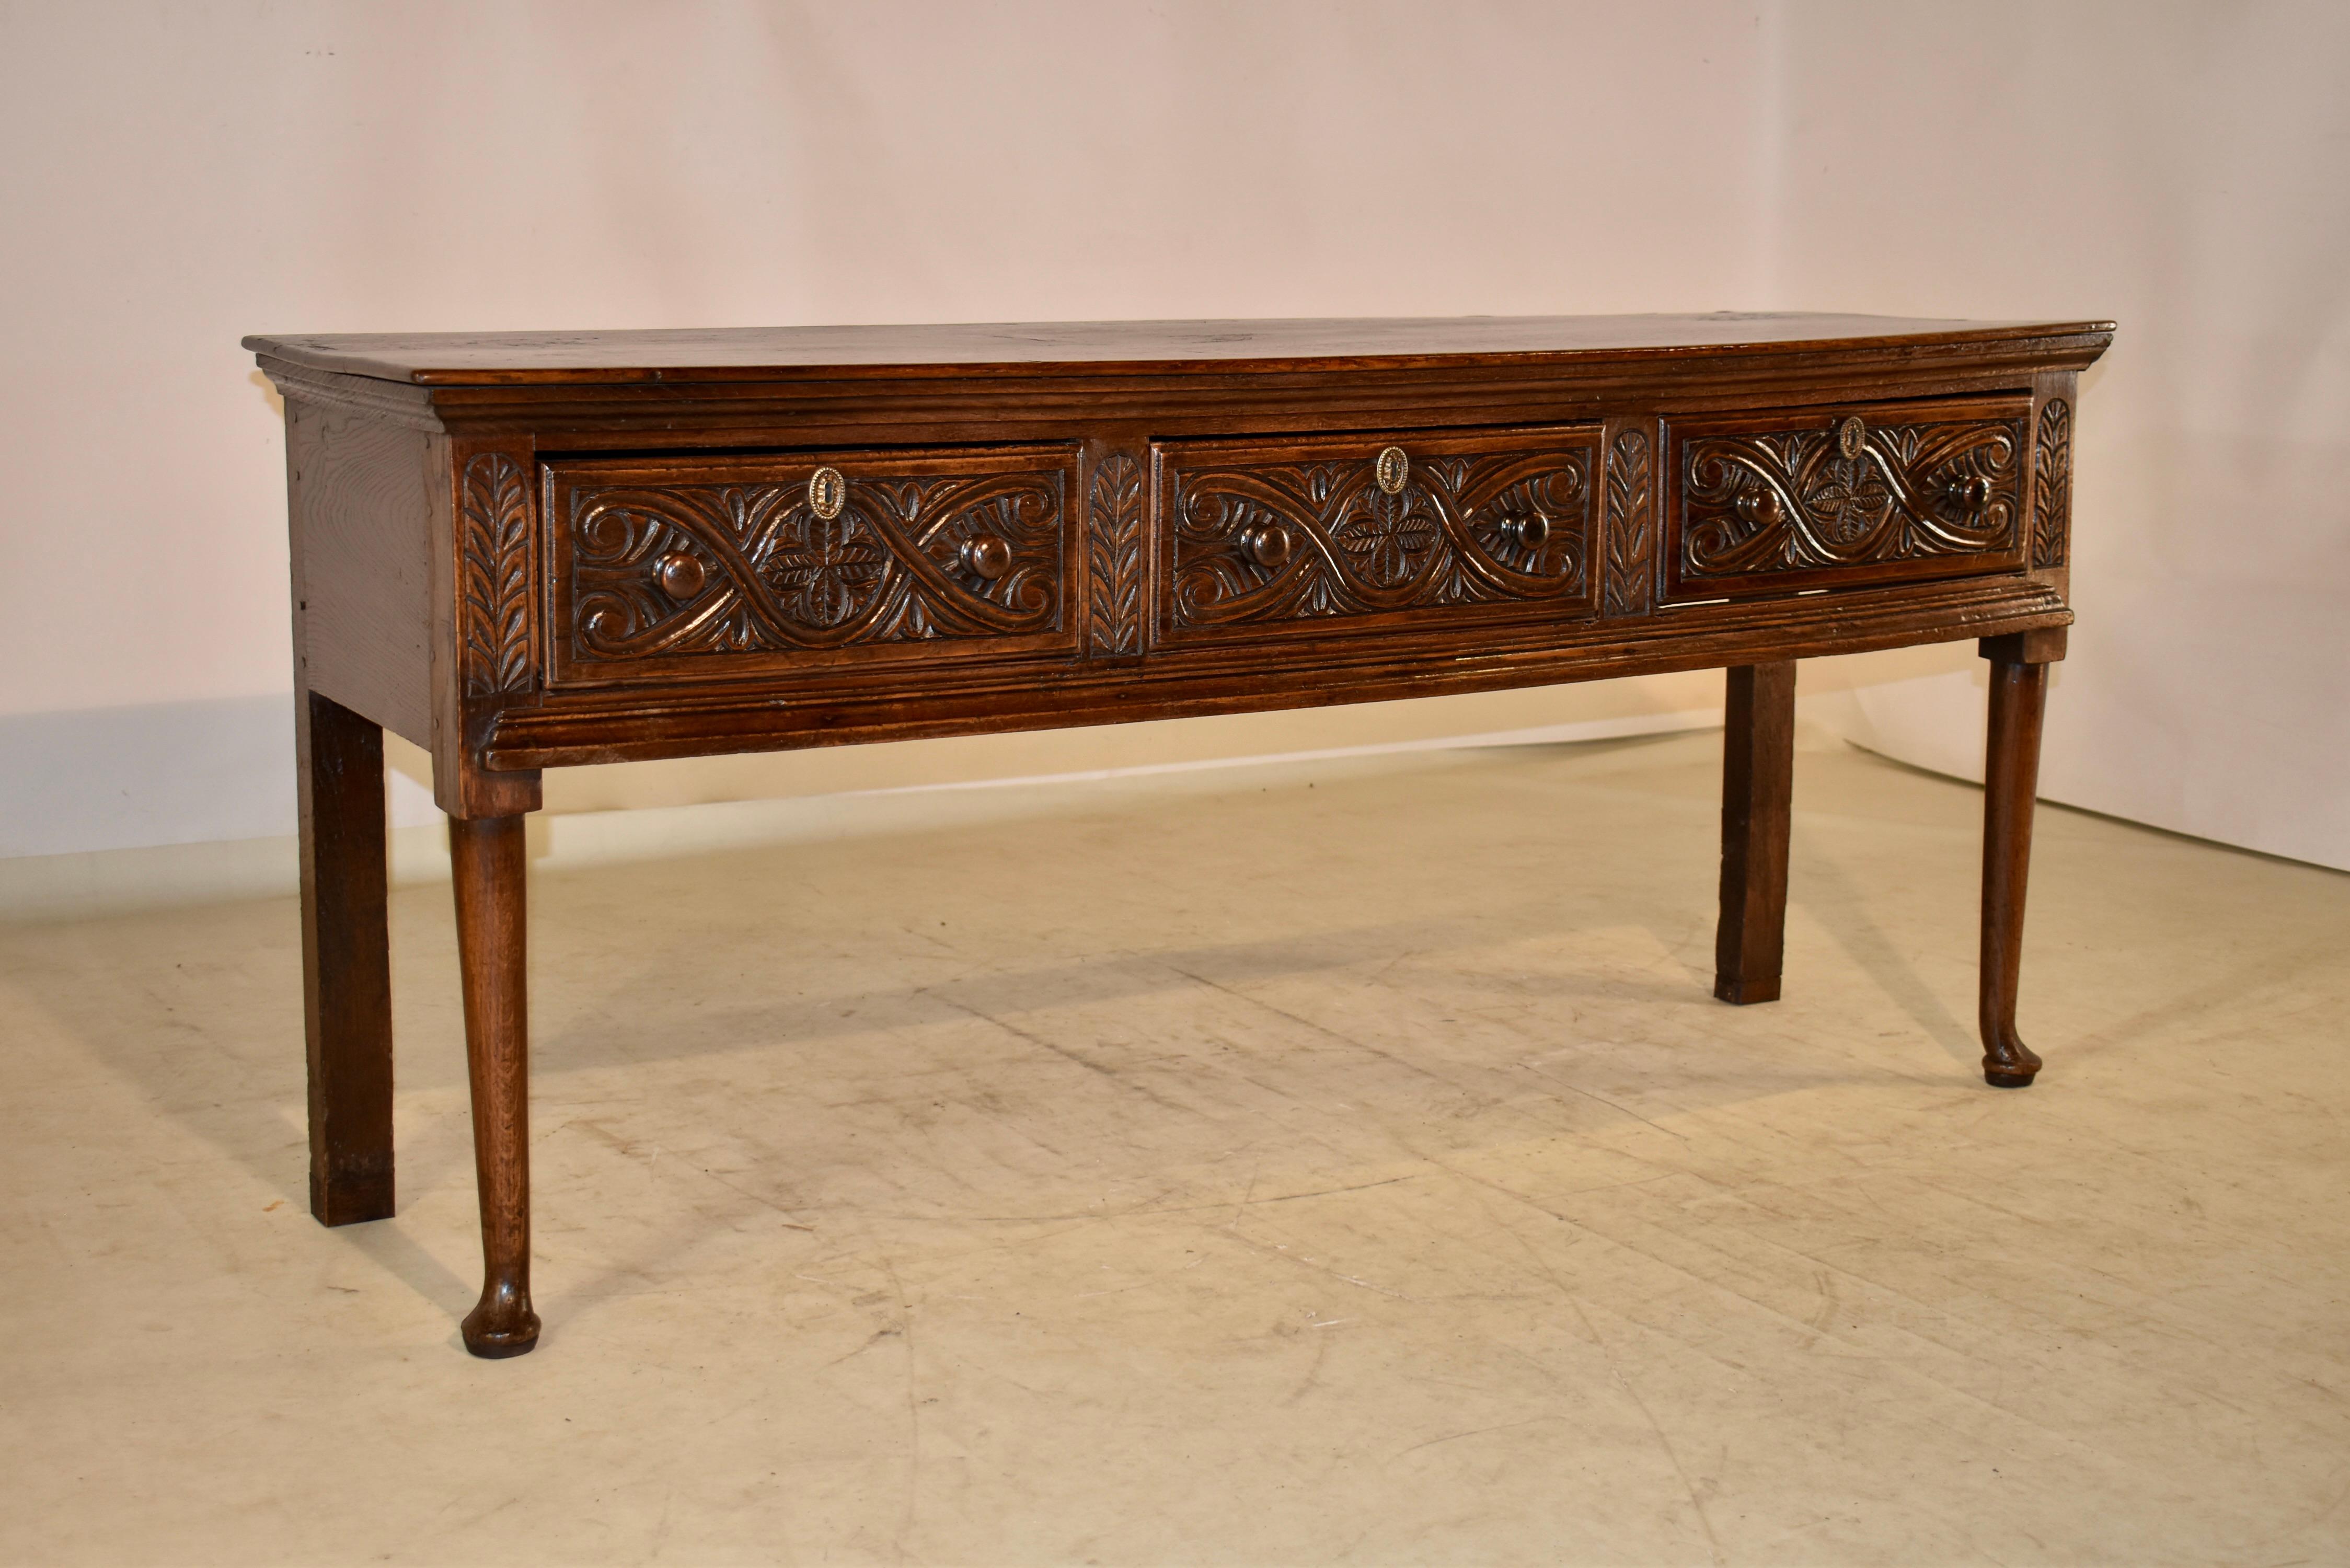 Hand-Carved 18th Century English Oak Sideboard